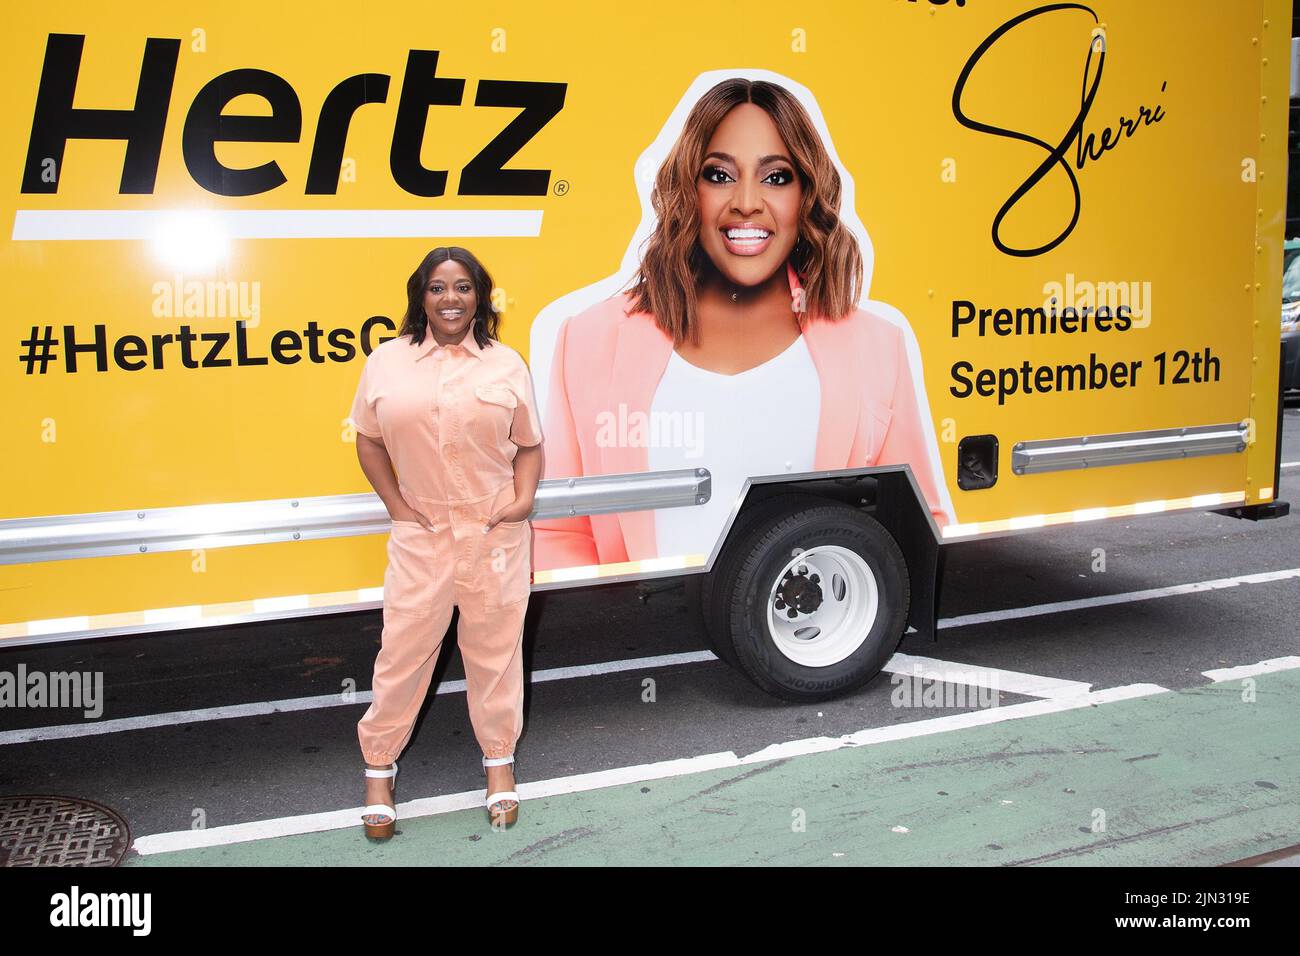 - New York - NY - 20220808 - Sherri Shepherd Celebrates New NYC Talk Show With Hertz Movers Hertz Midtown, NY - Sherri Shepherd - Janet Mayer/Startraksphoto.com -   -  This is an editorial, rights-managed image. Please contact  INSTAR Images  for licensing fee and rights information at sales@instarimages.com or call +1 212 414 0207. This image may not be published in any way that is, or might be deemed to be, defamatory, libelous, pornographic, or obscene. Please consult our sales department for any clarification needed prior to publication and use. INSTAR Images reserves the right to pursue u Stock Photo